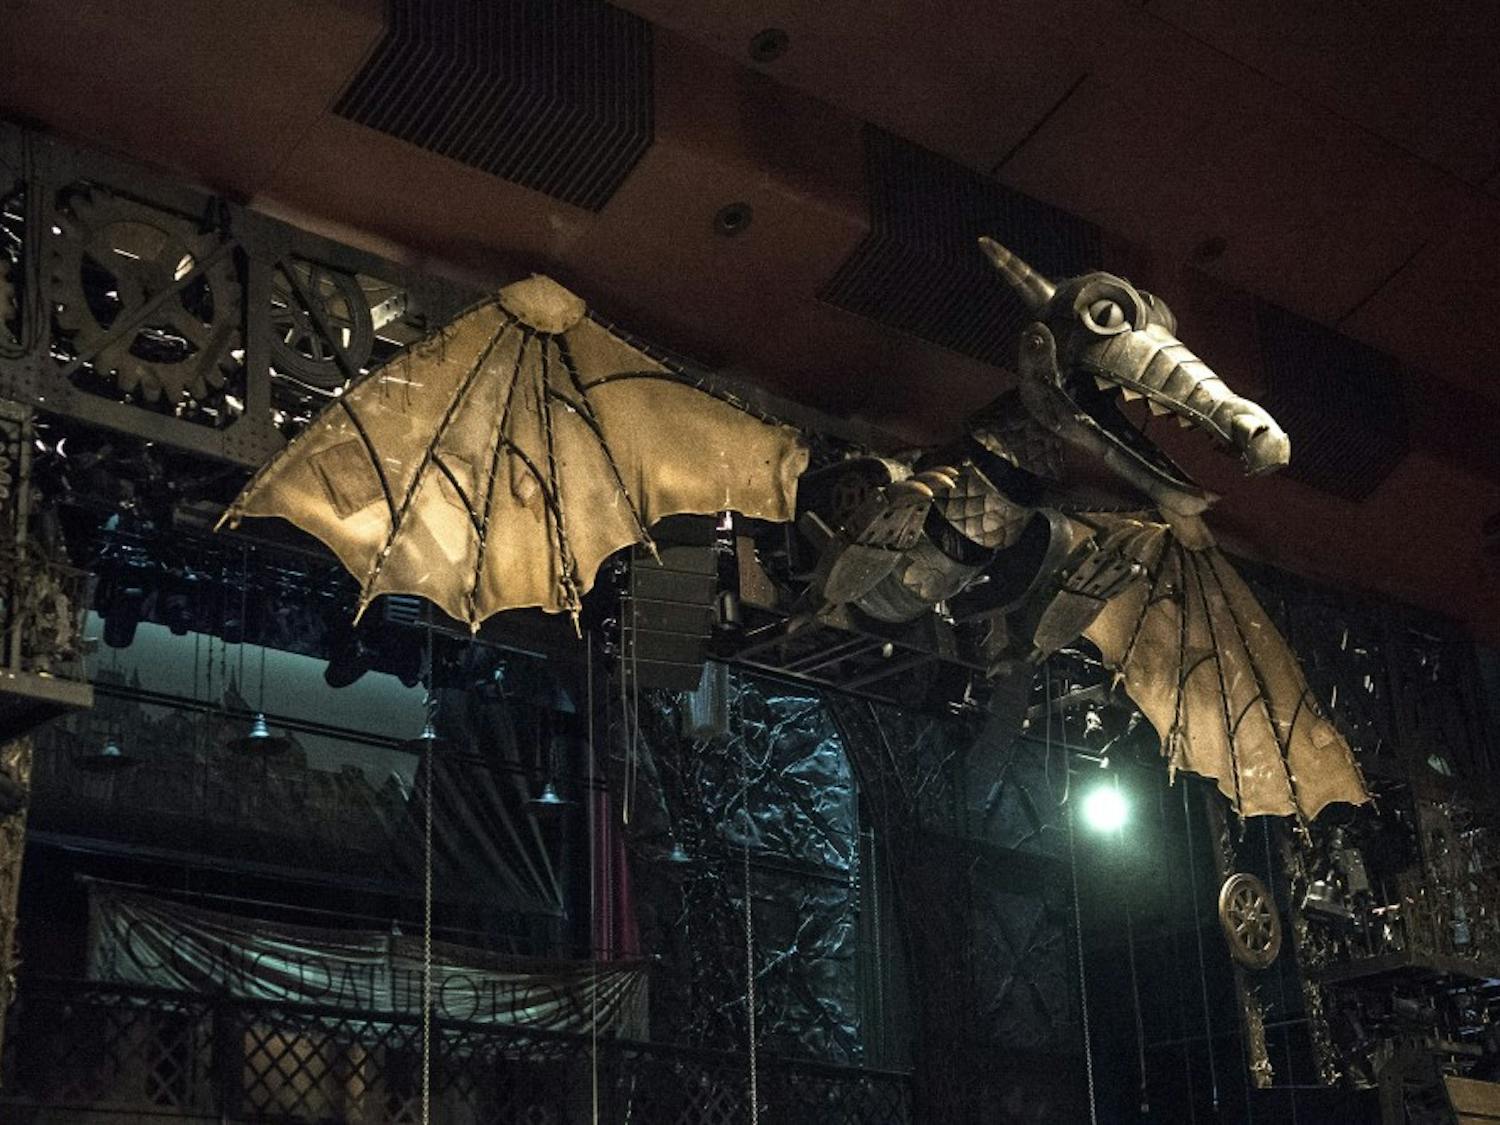 The Clock of the Time Dragon overlooks the “Wicked” audience.